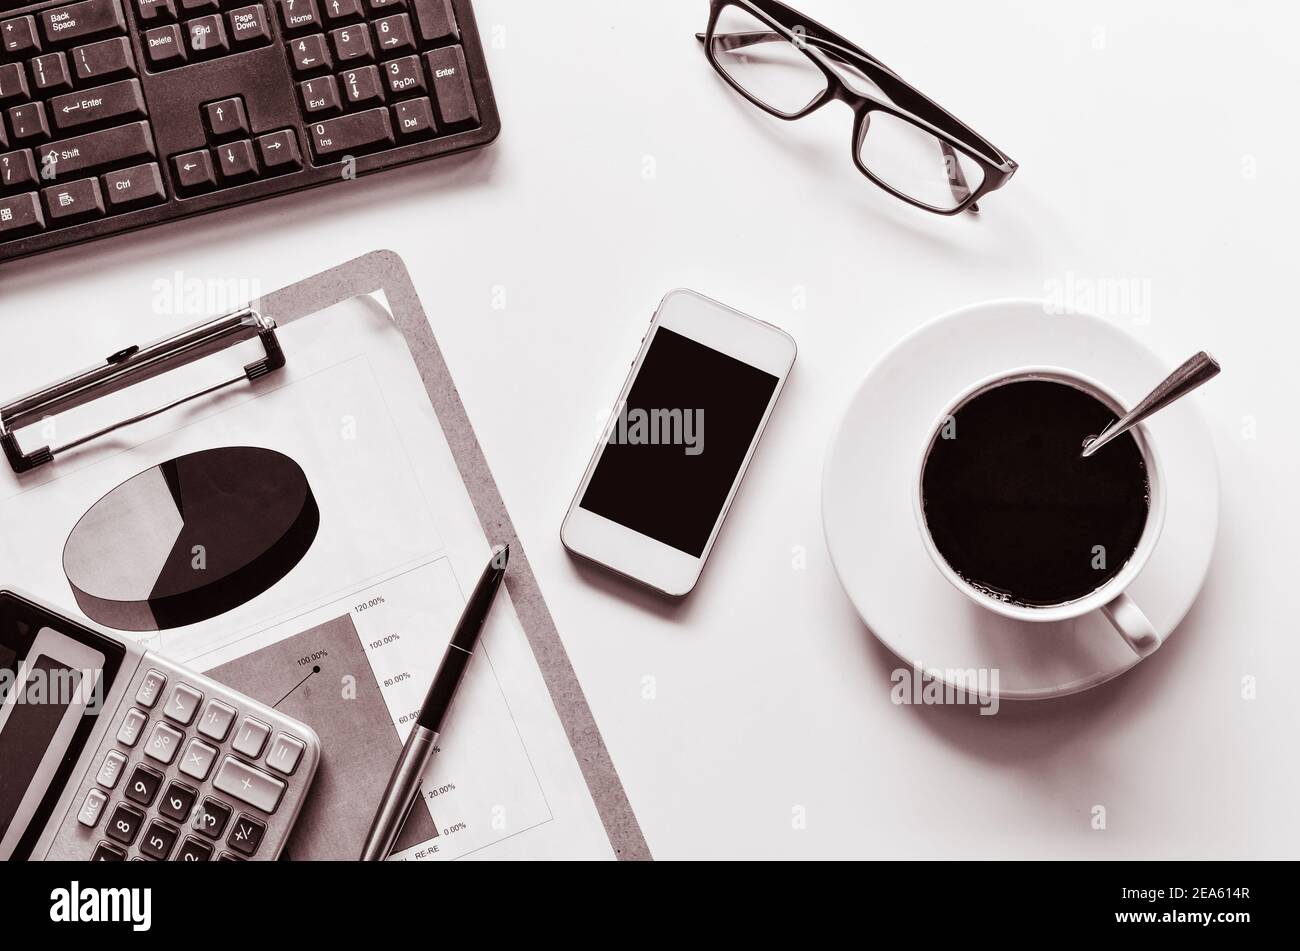 Data Graphing Calculator, pen, glasses and a cup of coffee - tone black and white Stock Photo